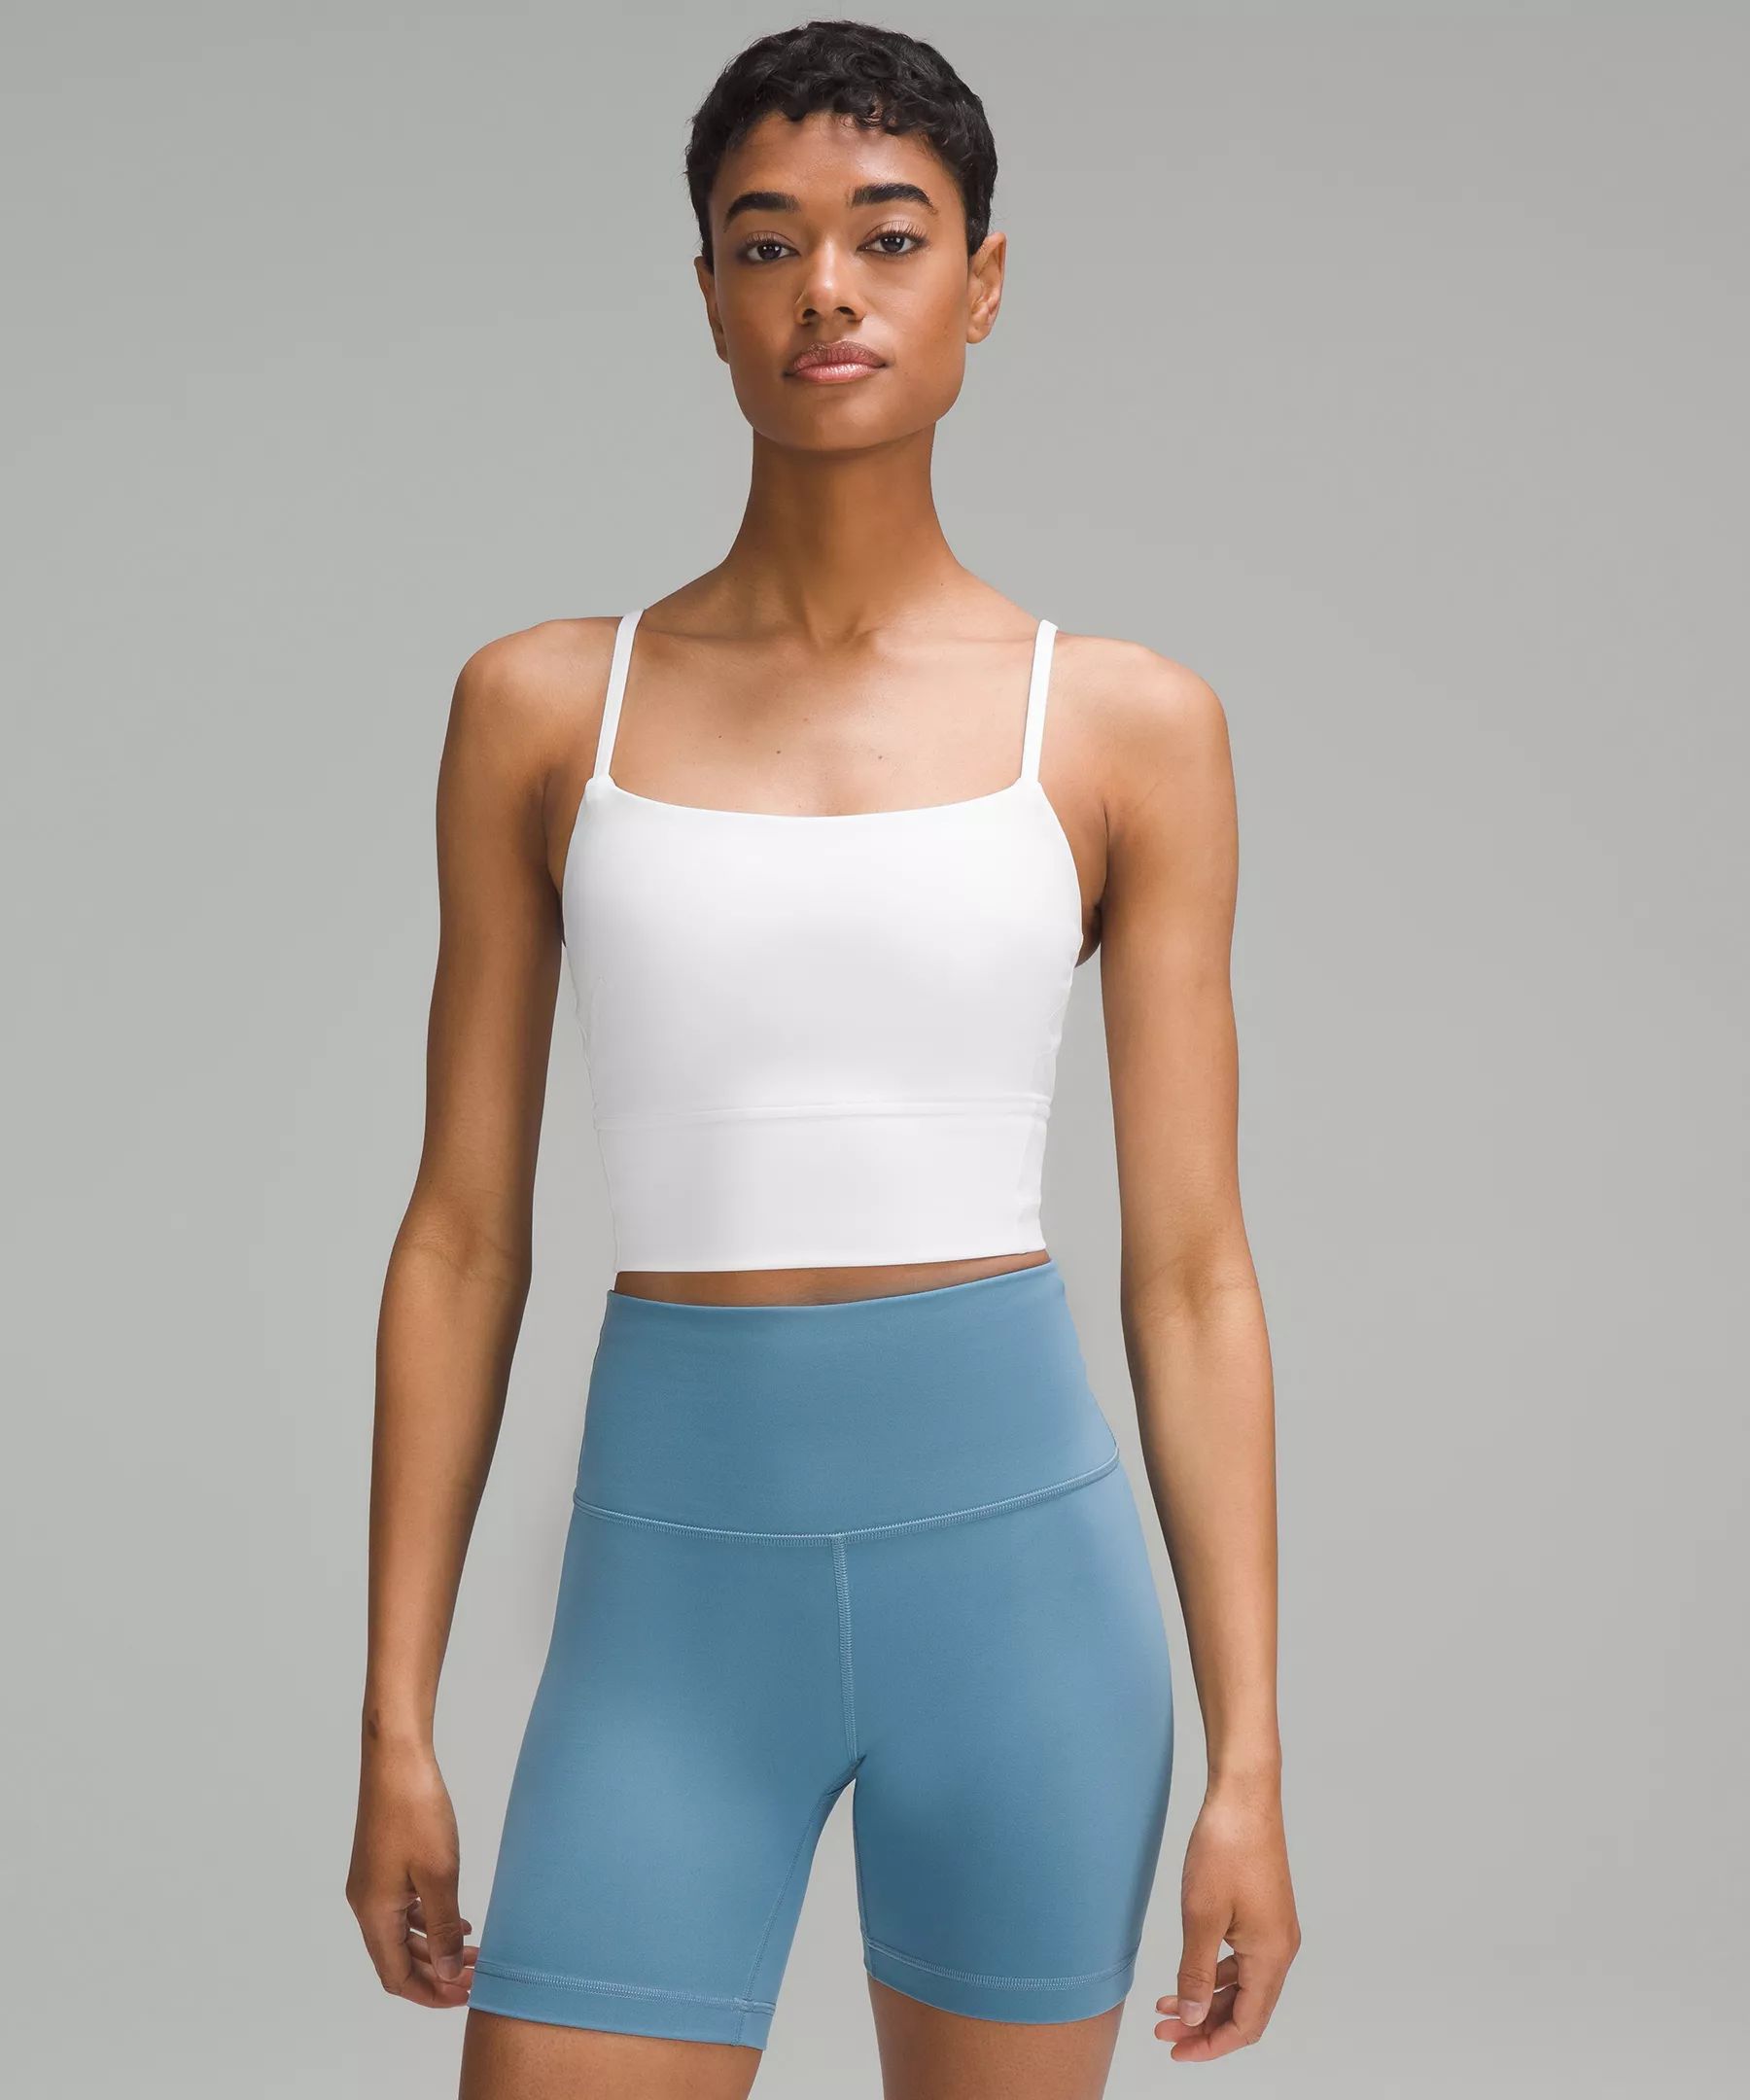 Wunder Train Strappy Tank TopFinal SaleYou can return in-store for creditLearn more | Lululemon (US)